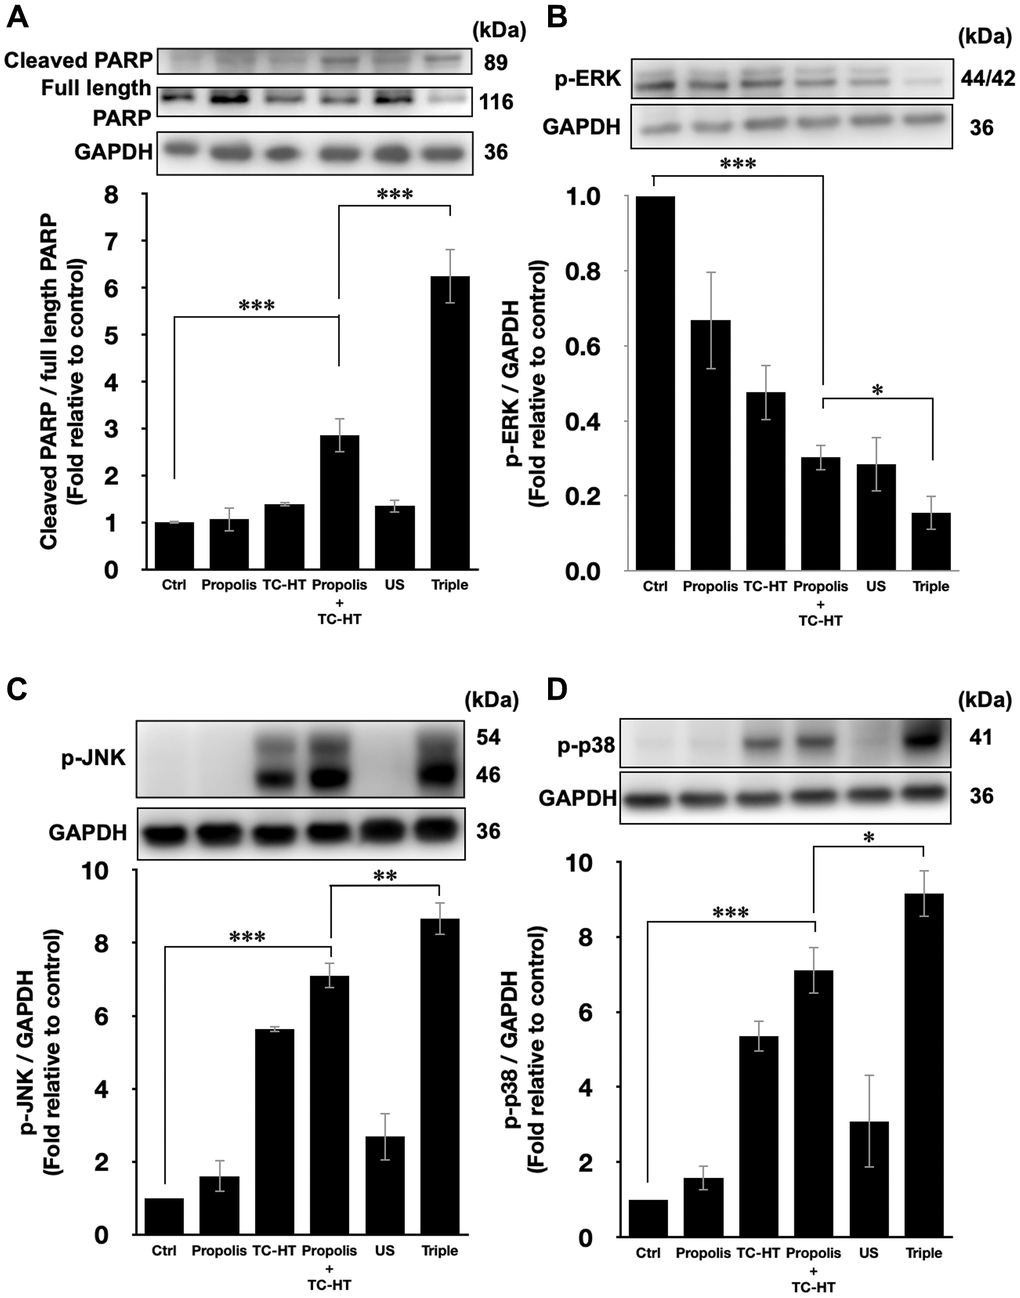 Triple treatment modulated apoptosis via regulating the MAPK family. Representative western blots of the apoptosis-related proteins and the quantification of (A) the PARP cleavage ratio (cleaved PARP/full length PARP), the phosphorylation level of (B) ERK, (C) JNK, and (D) p38. GAPDH was used as loading control. Data were presented as the mean ± standard deviation in triplicate. *P **P ***P 